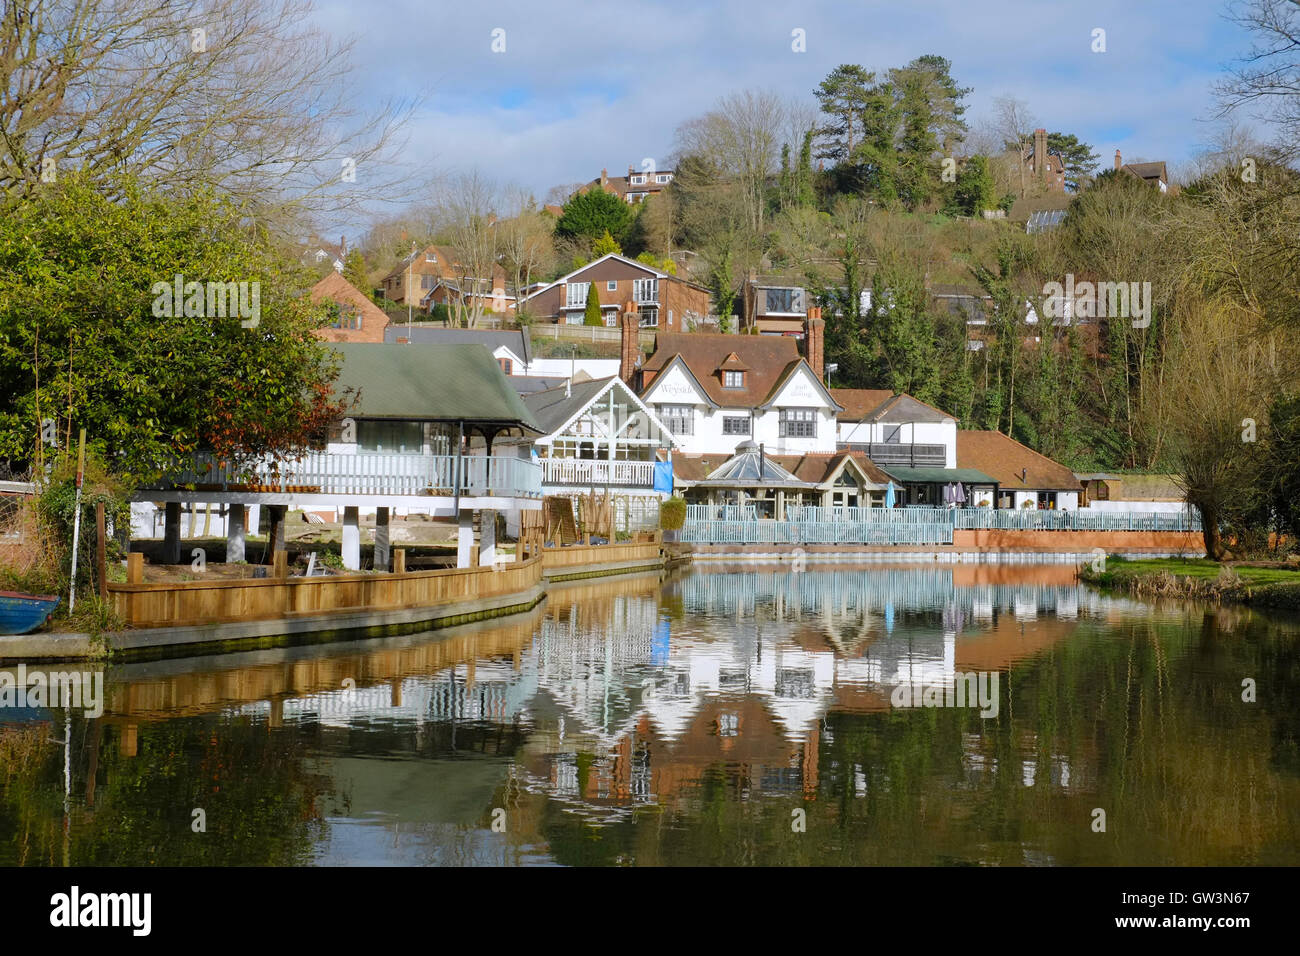 A beautiful view of the old boathouse reflected in the water, on the River Wey in Guildford, Stock Photo